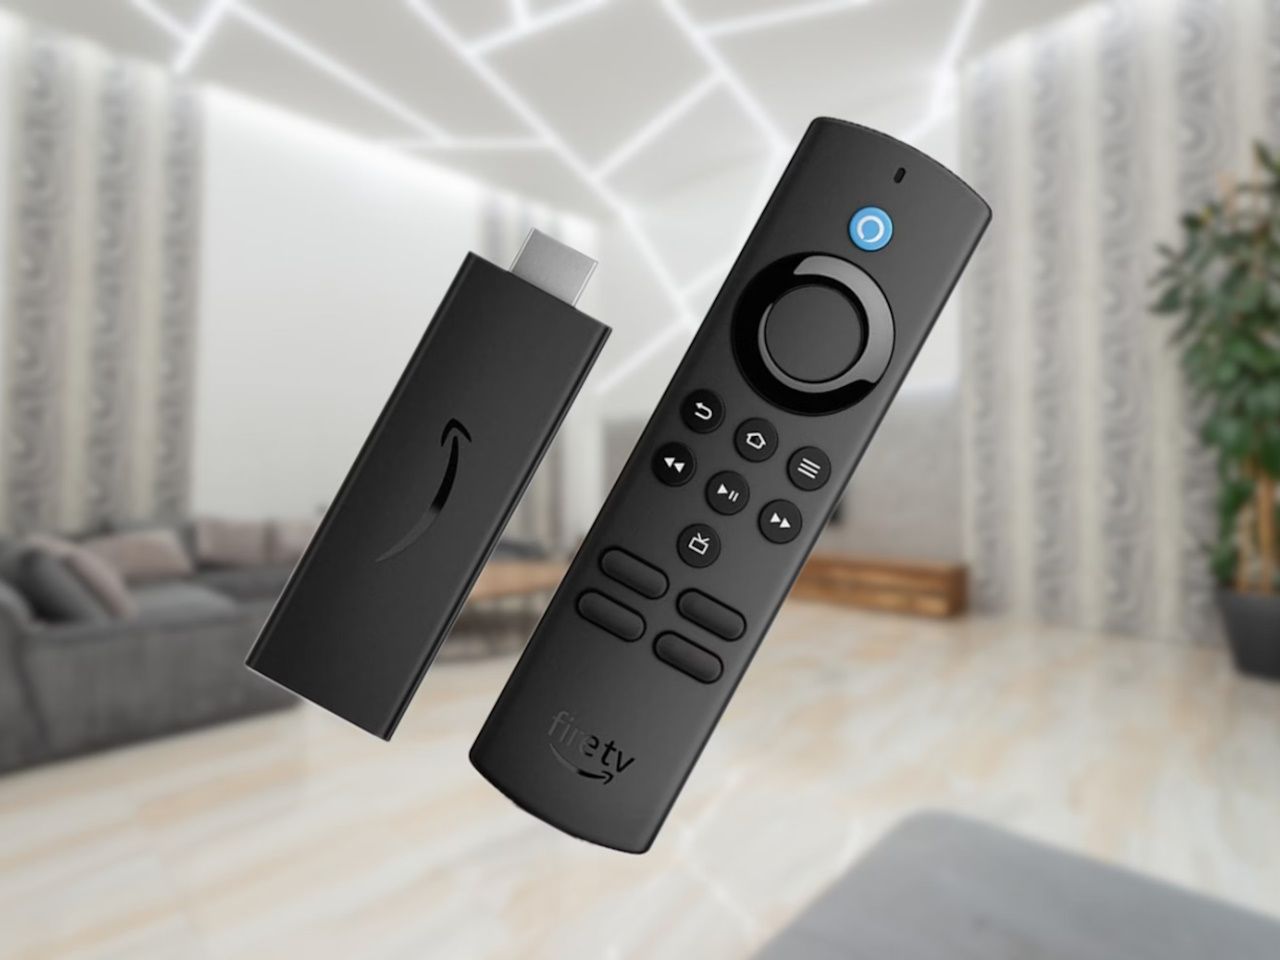 Amazon Fire TV Stick Lite in front of living room that's blurred